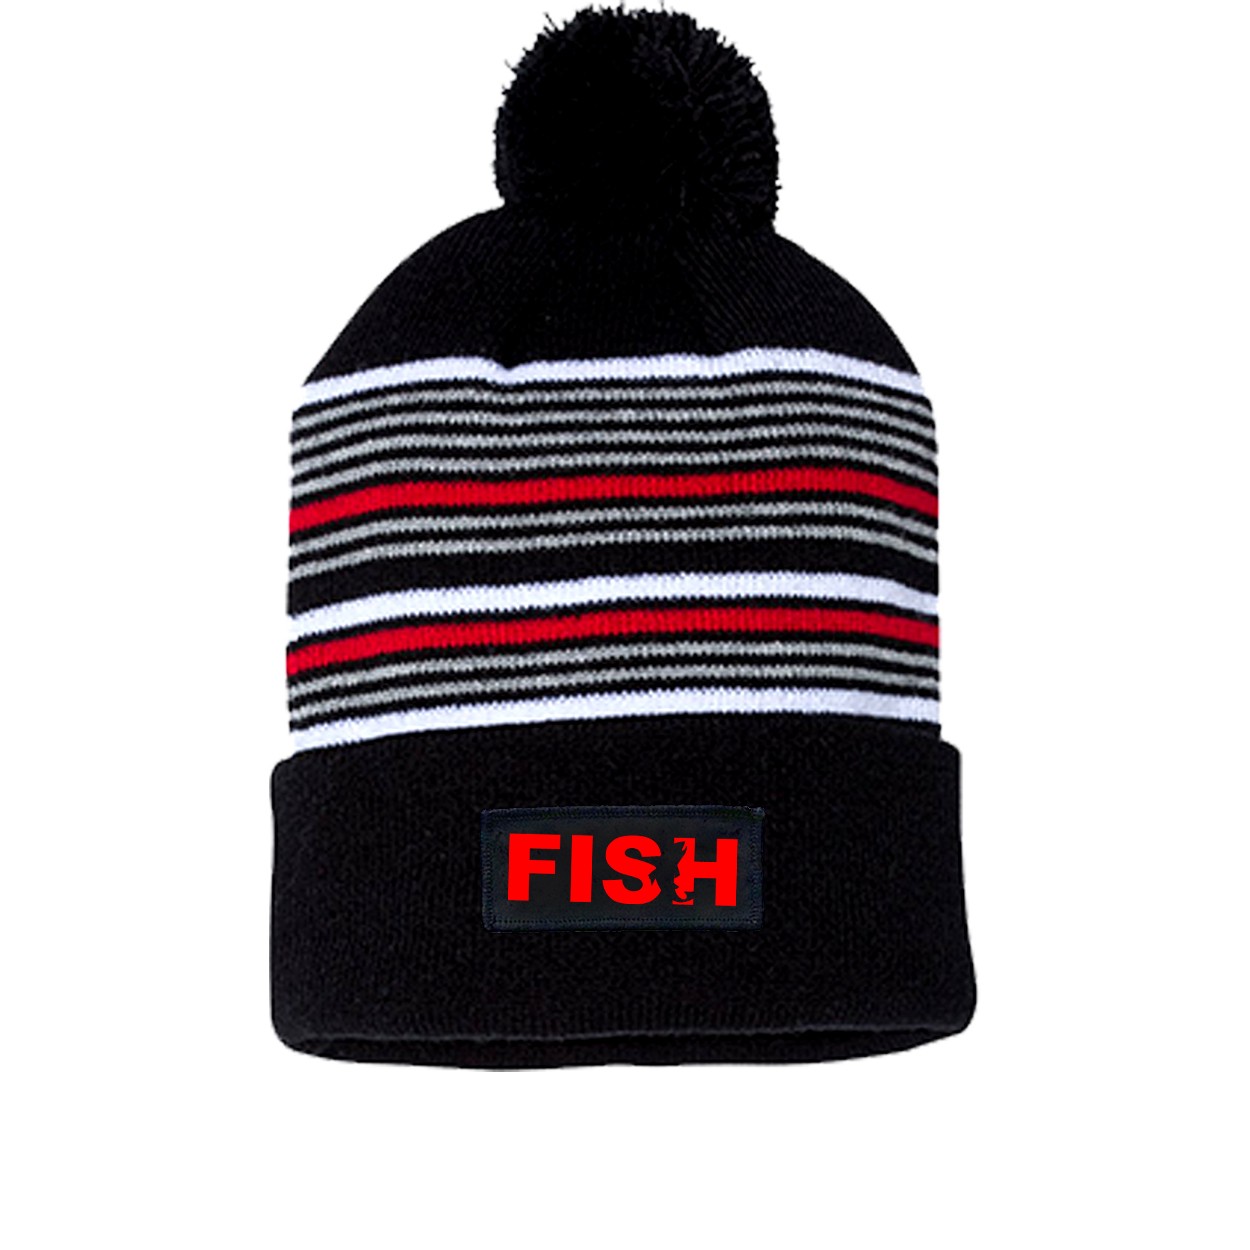 Fish Catch Logo Night Out Woven Patch Roll Up Pom Knit Beanie Black/ White/ Grey/ Red Beanie (Red Logo)